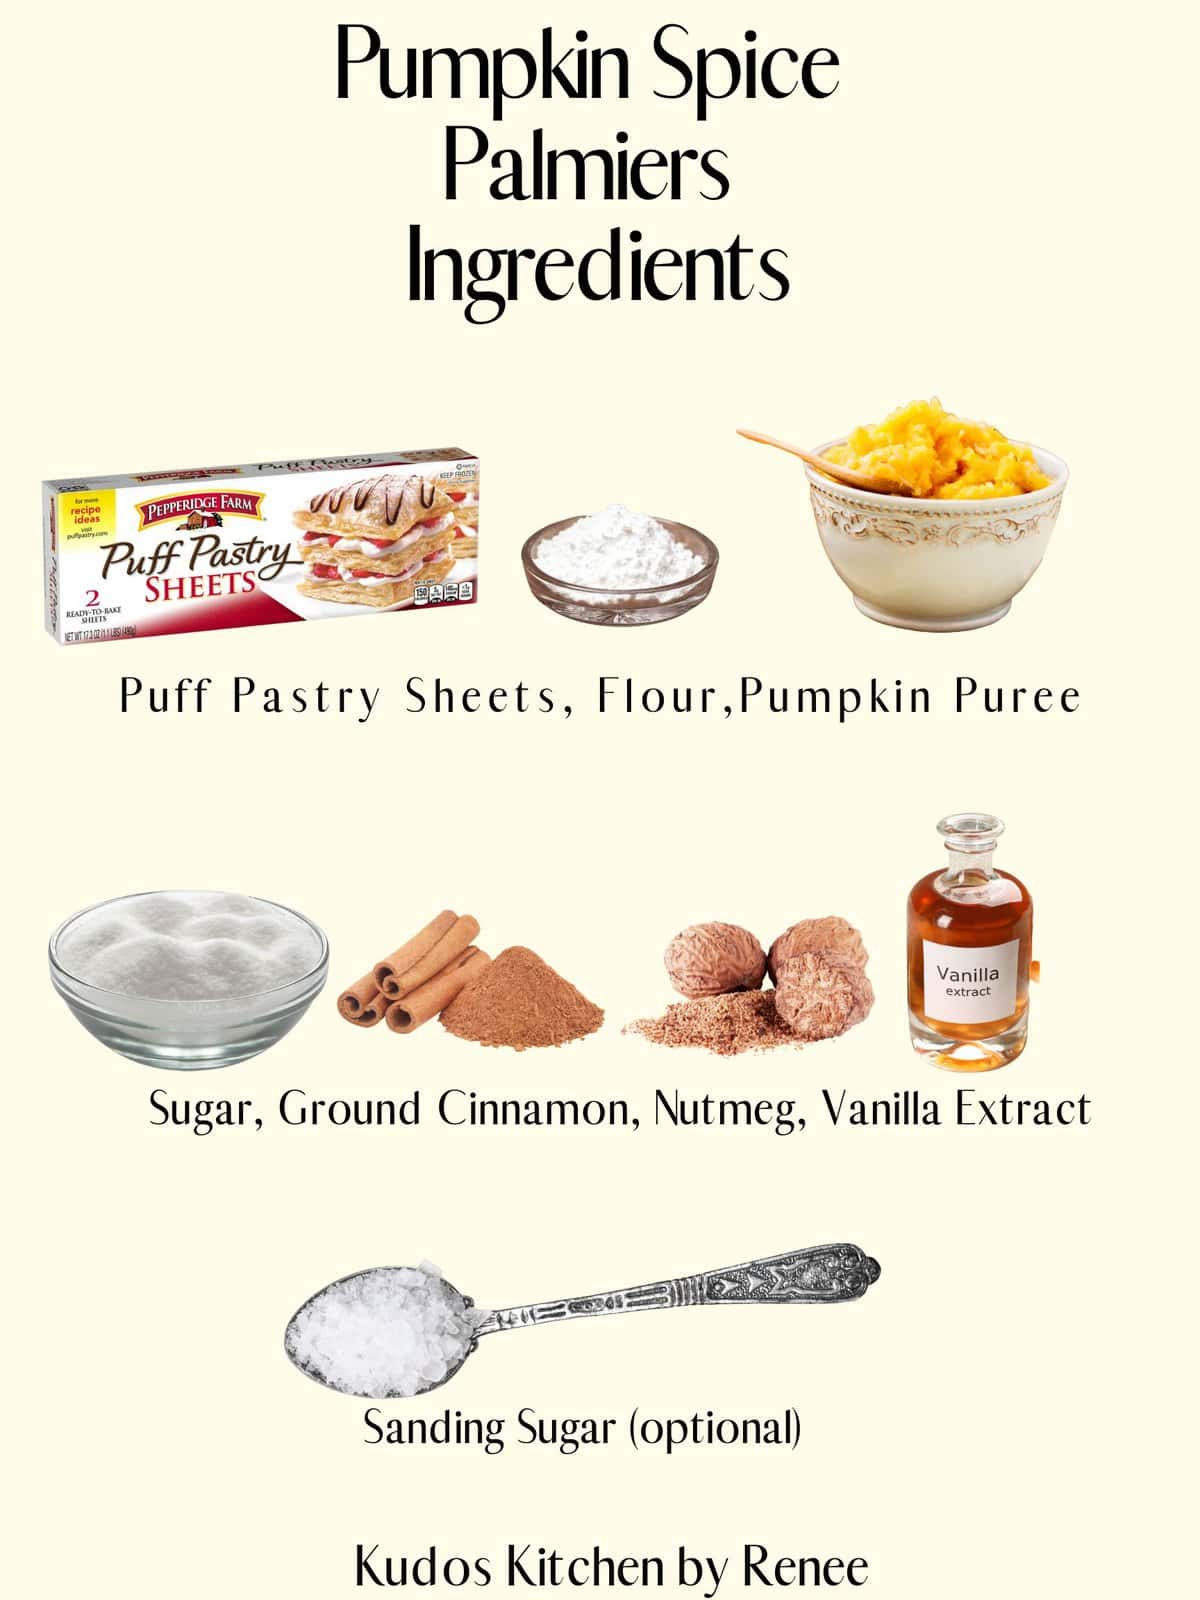 A visual ingredient list for making Pumpkin Spice Palmiers.